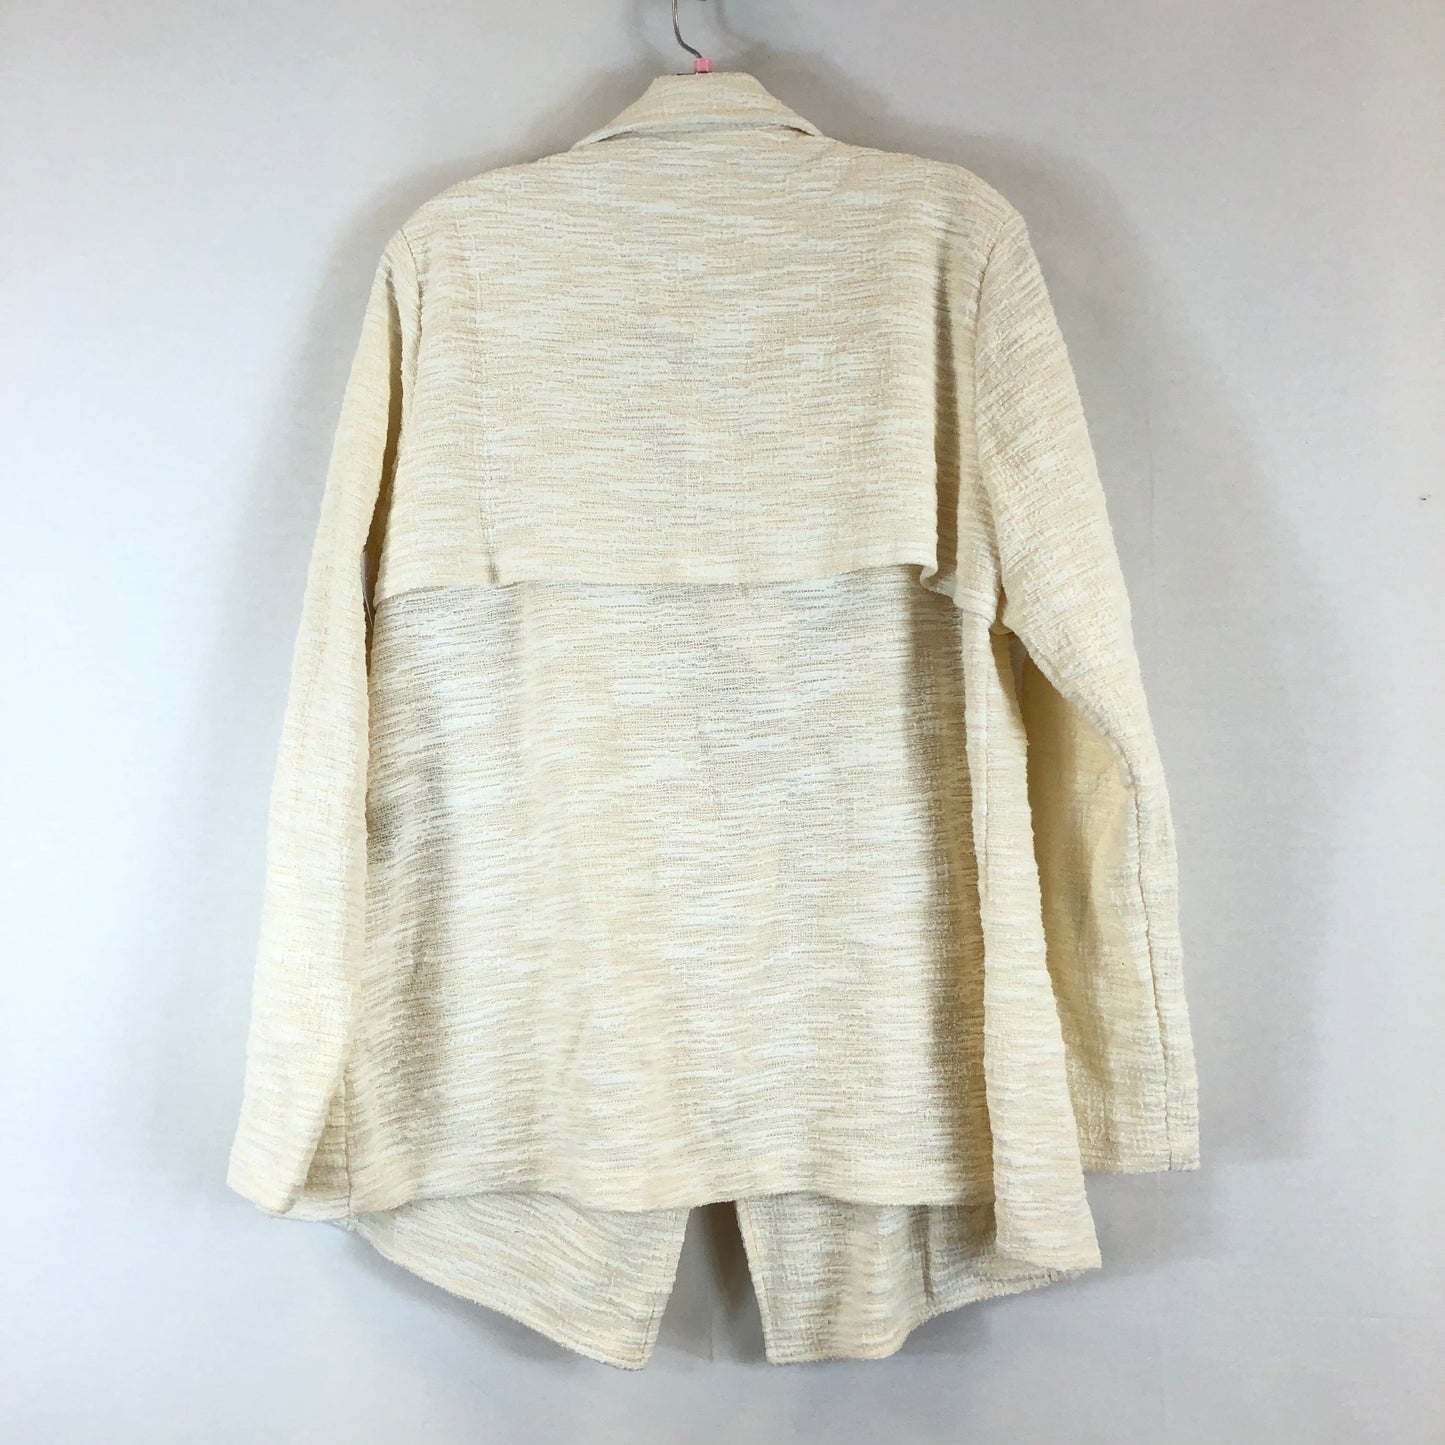 Cardigan By Dr2  Size: L